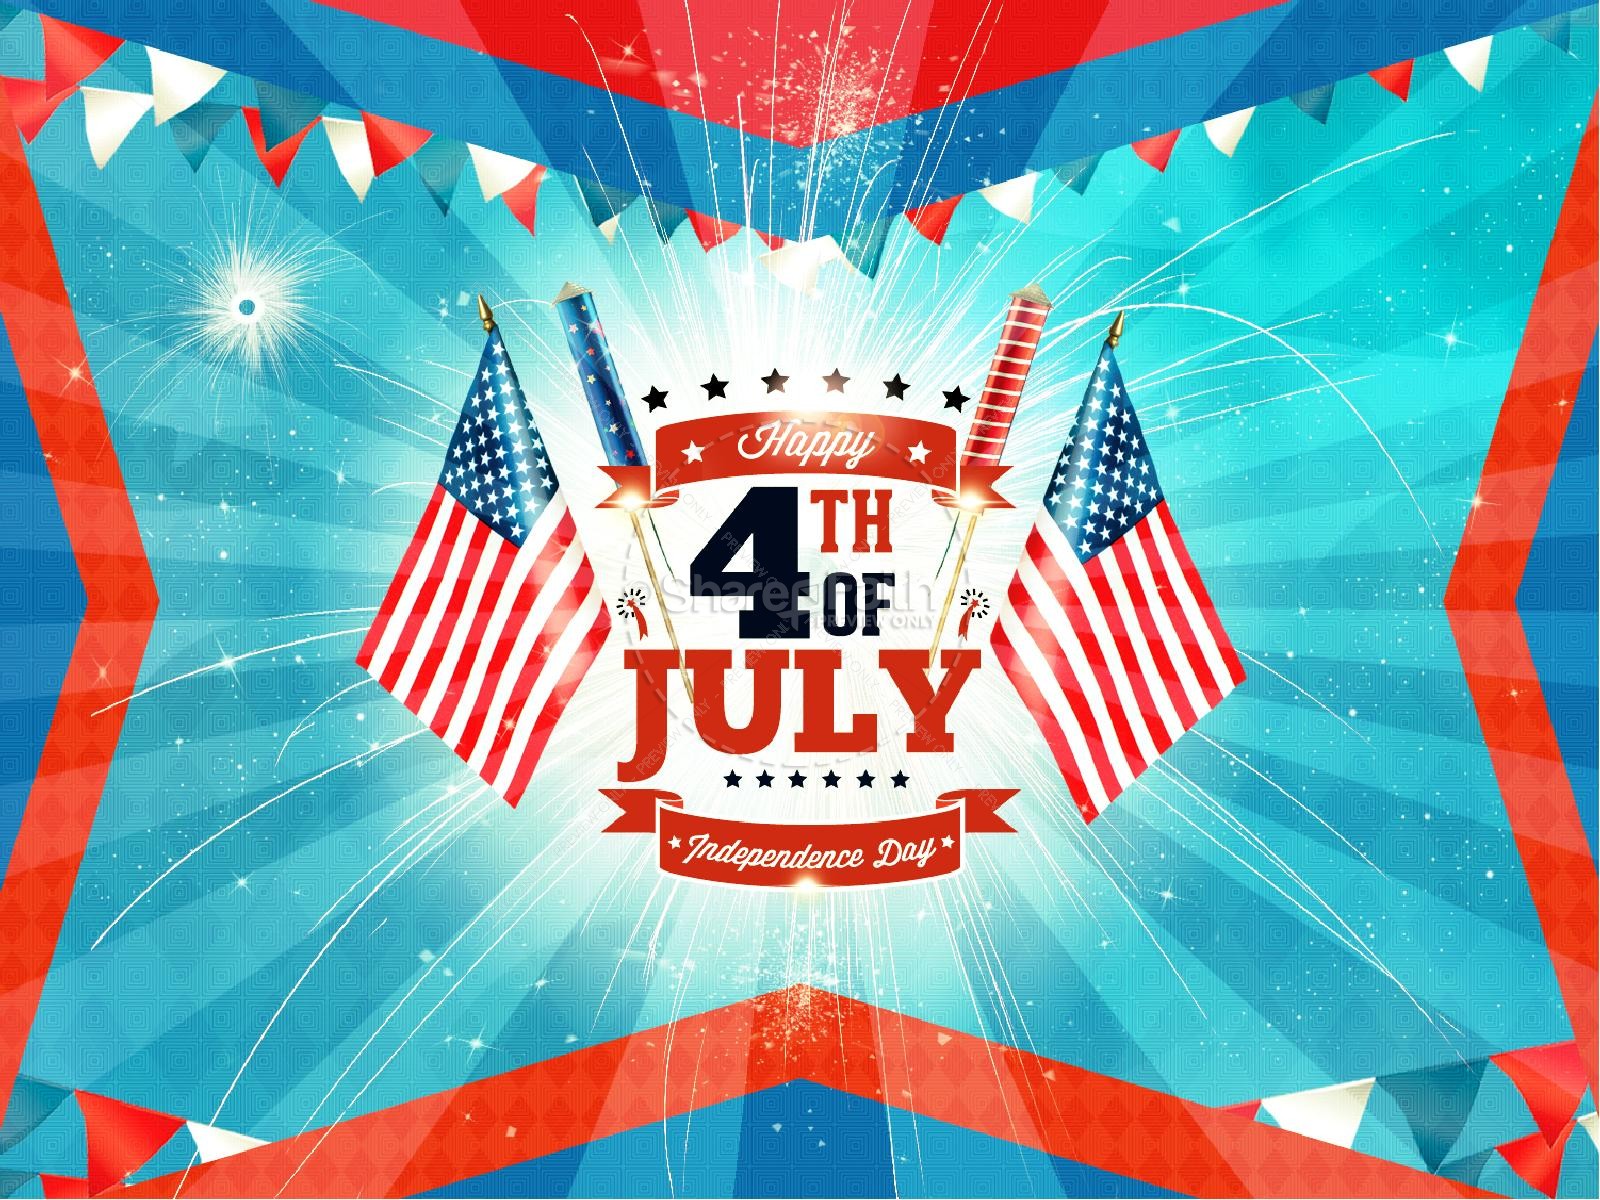 Best 34+ Christian 4th of July Backgrounds on HipWallpaper.